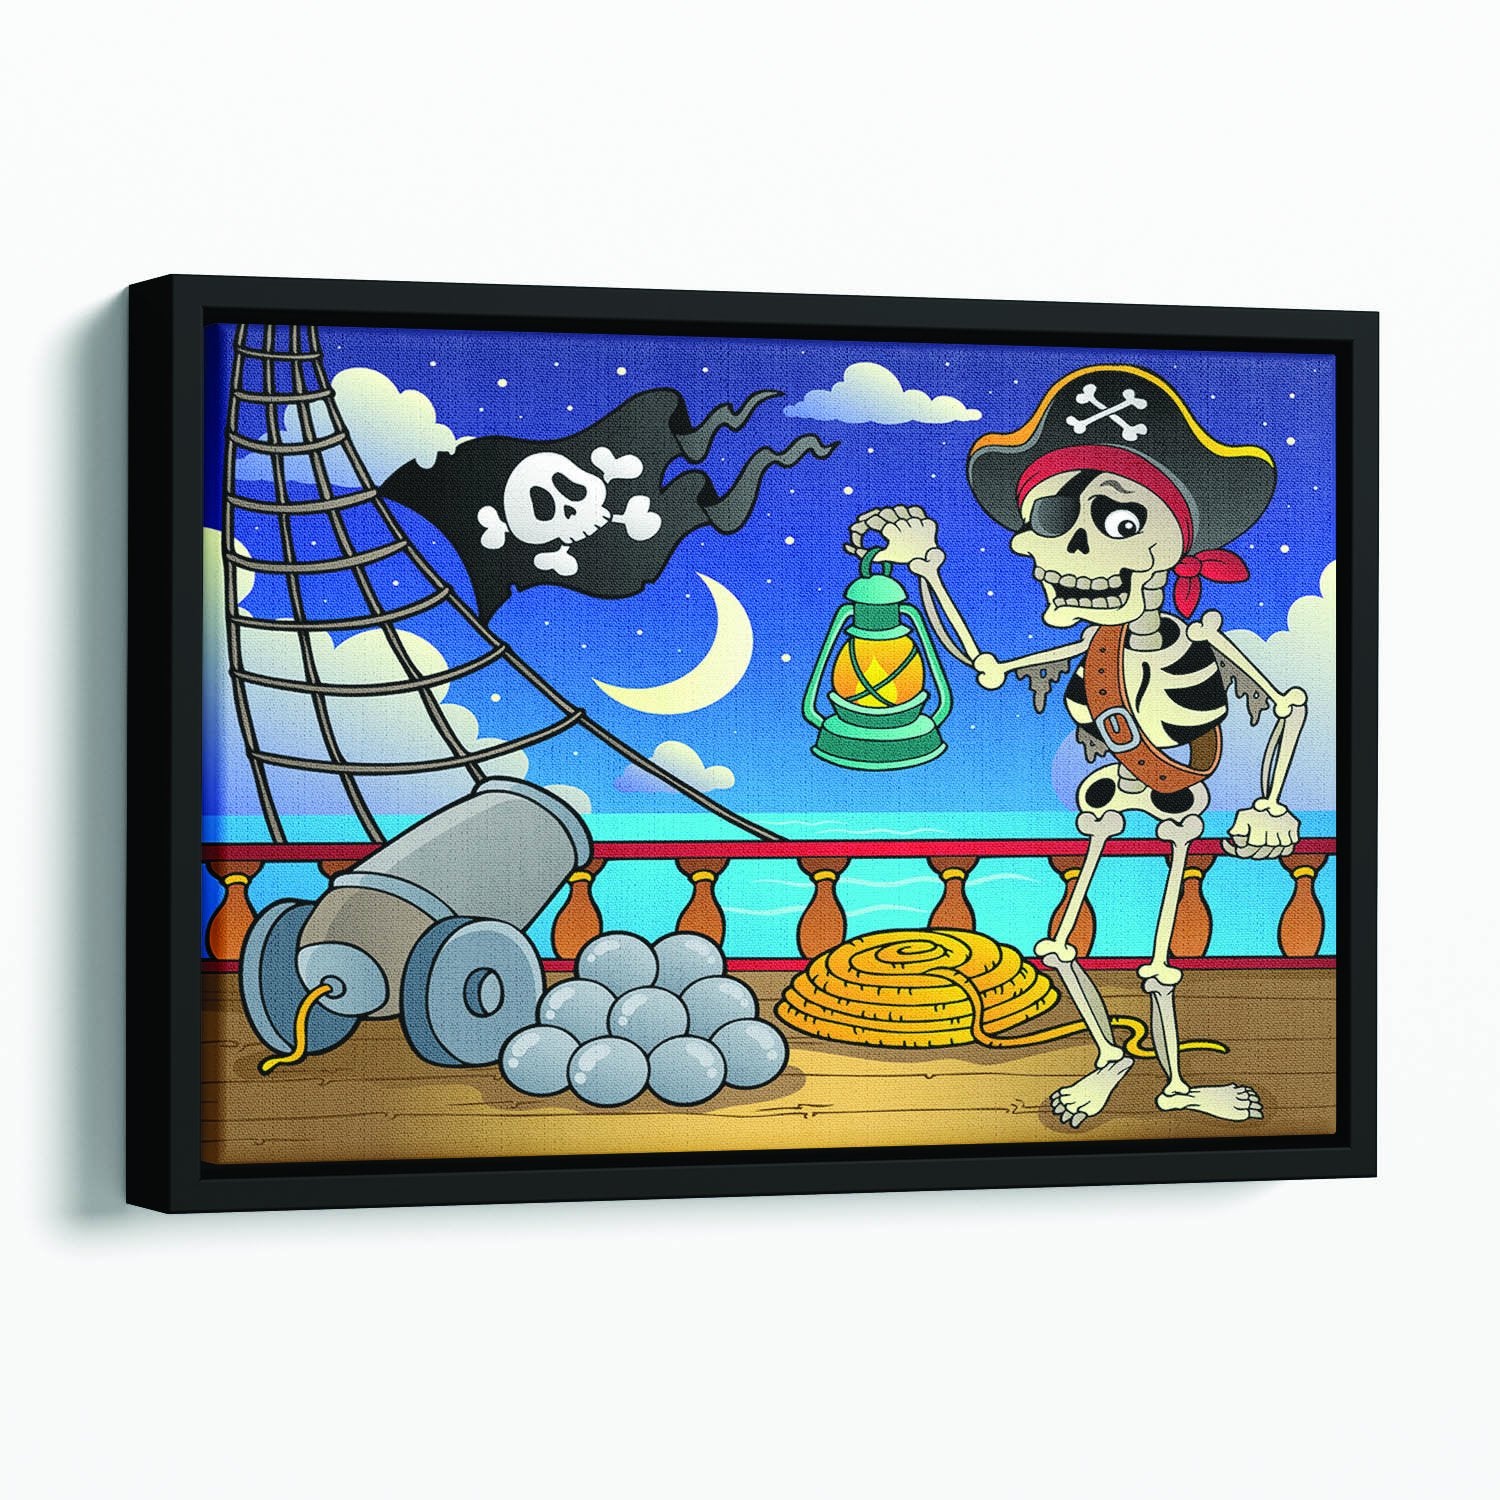 Pirate ship deck theme 6 Floating Framed Canvas